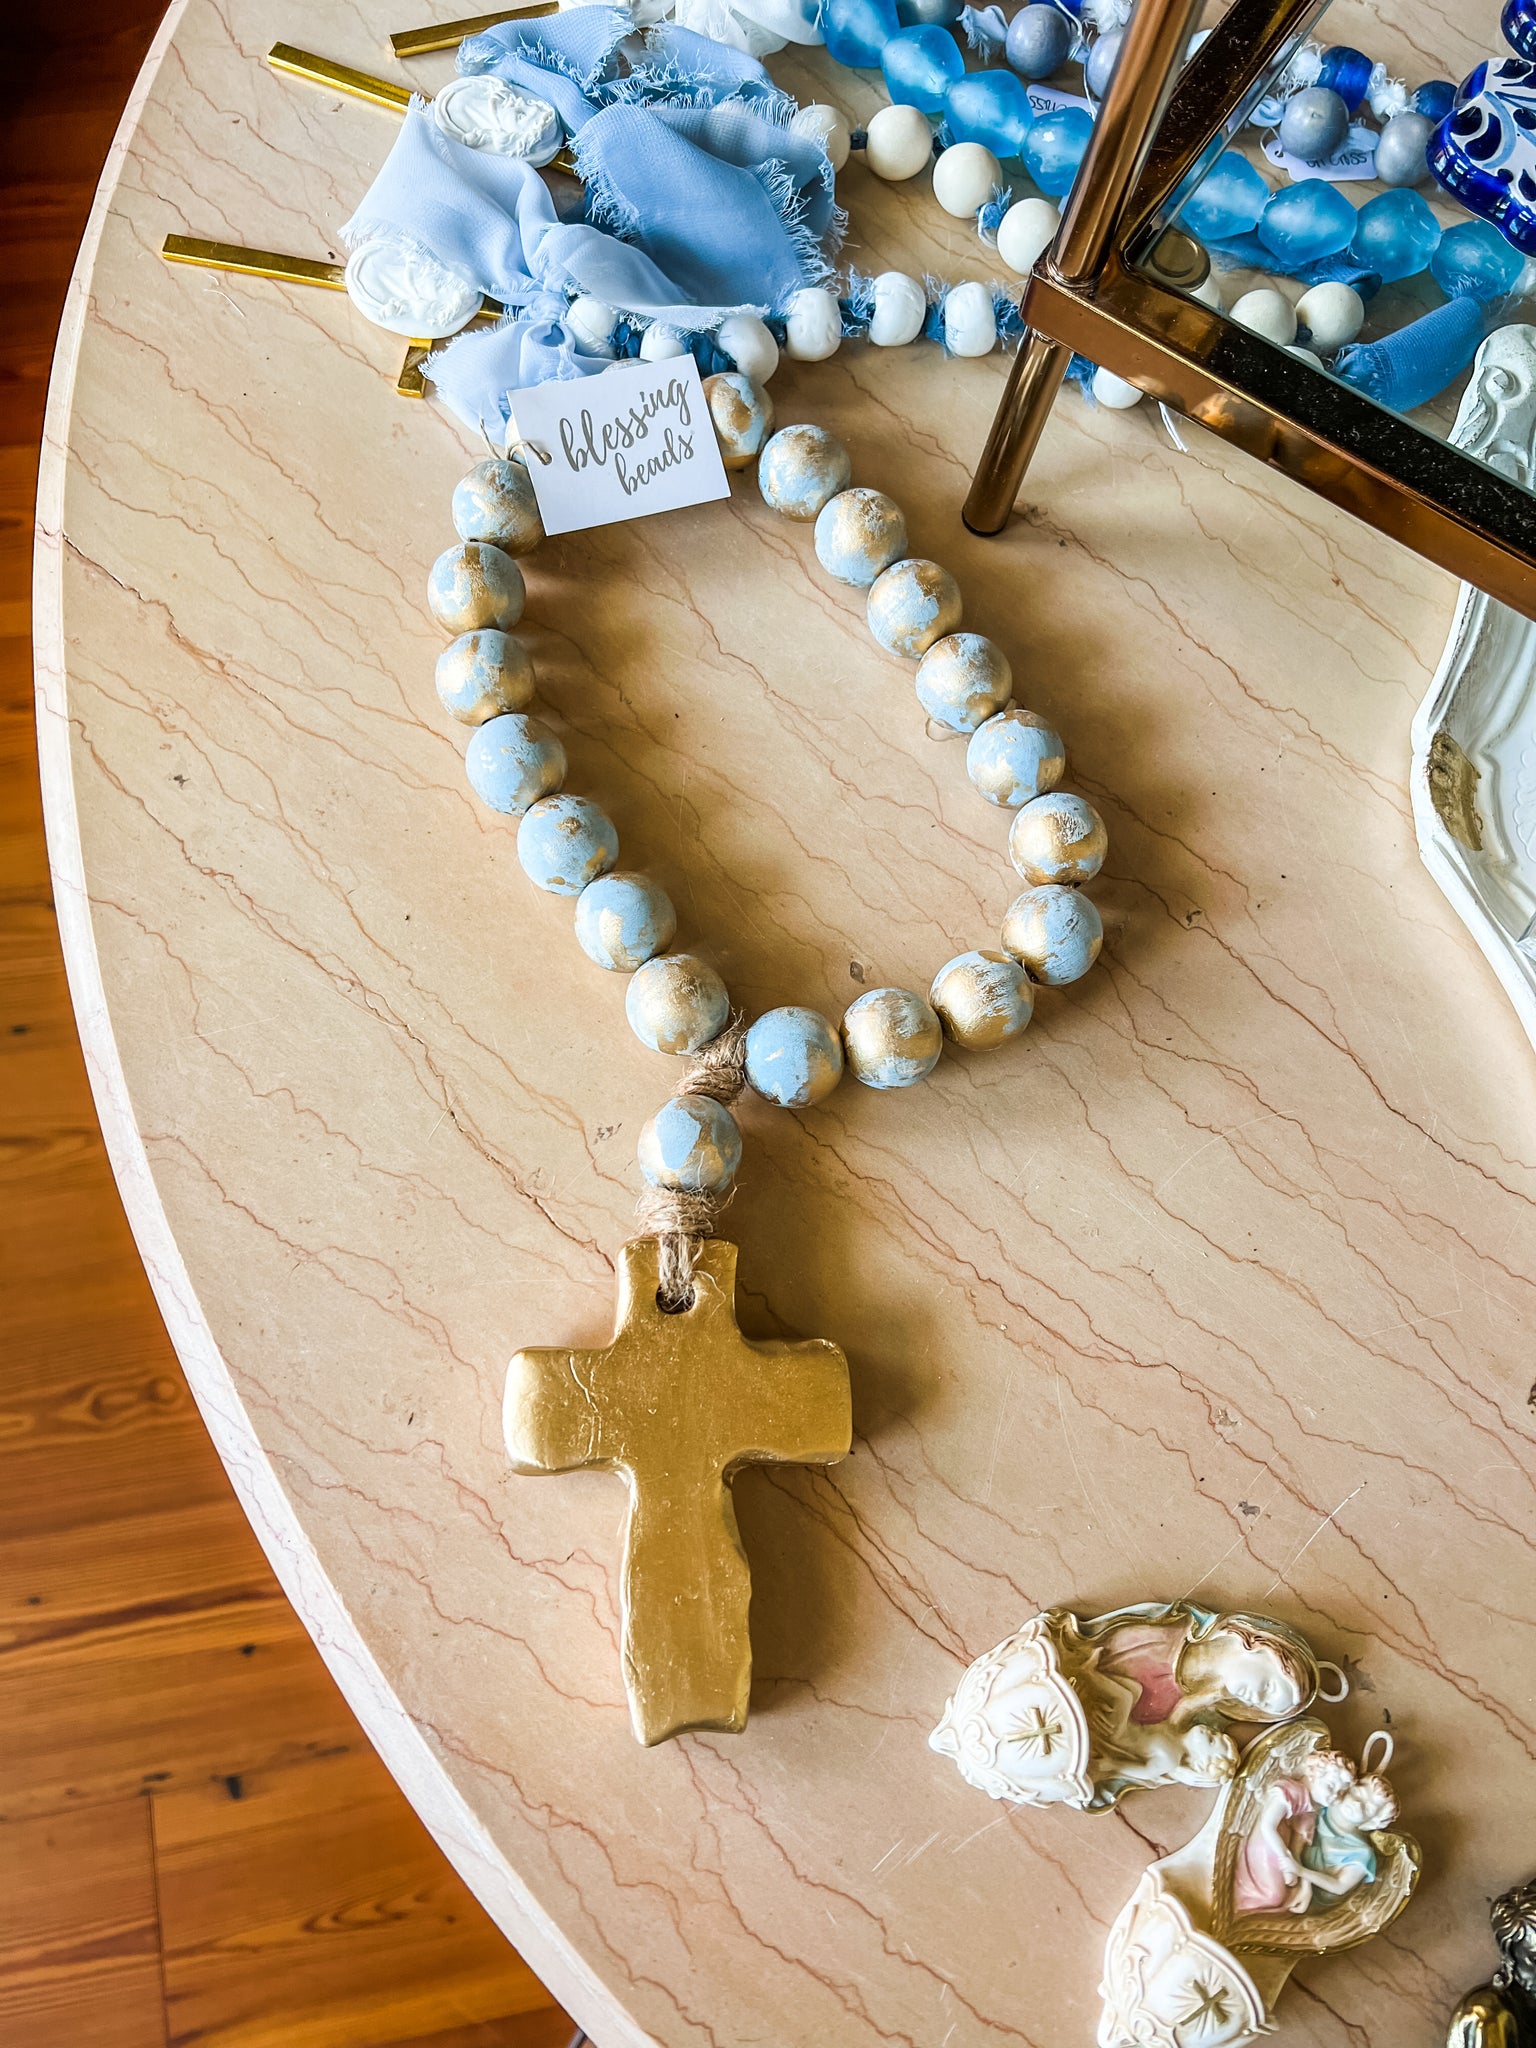 Blessing Beads With Cross 